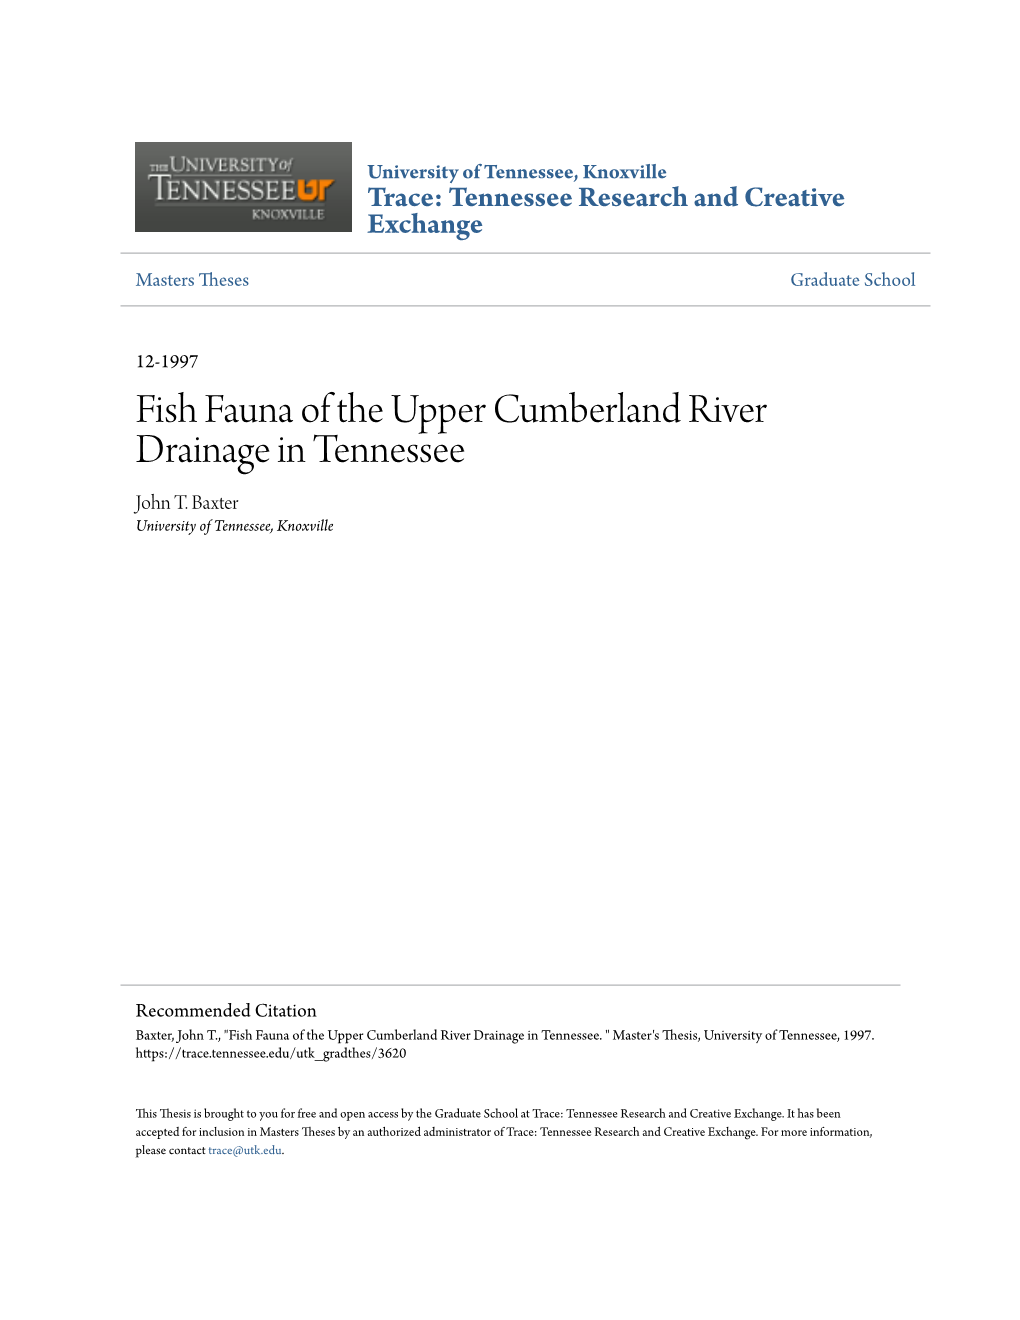 Fish Fauna of the Upper Cumberland River Drainage in Tennessee John T